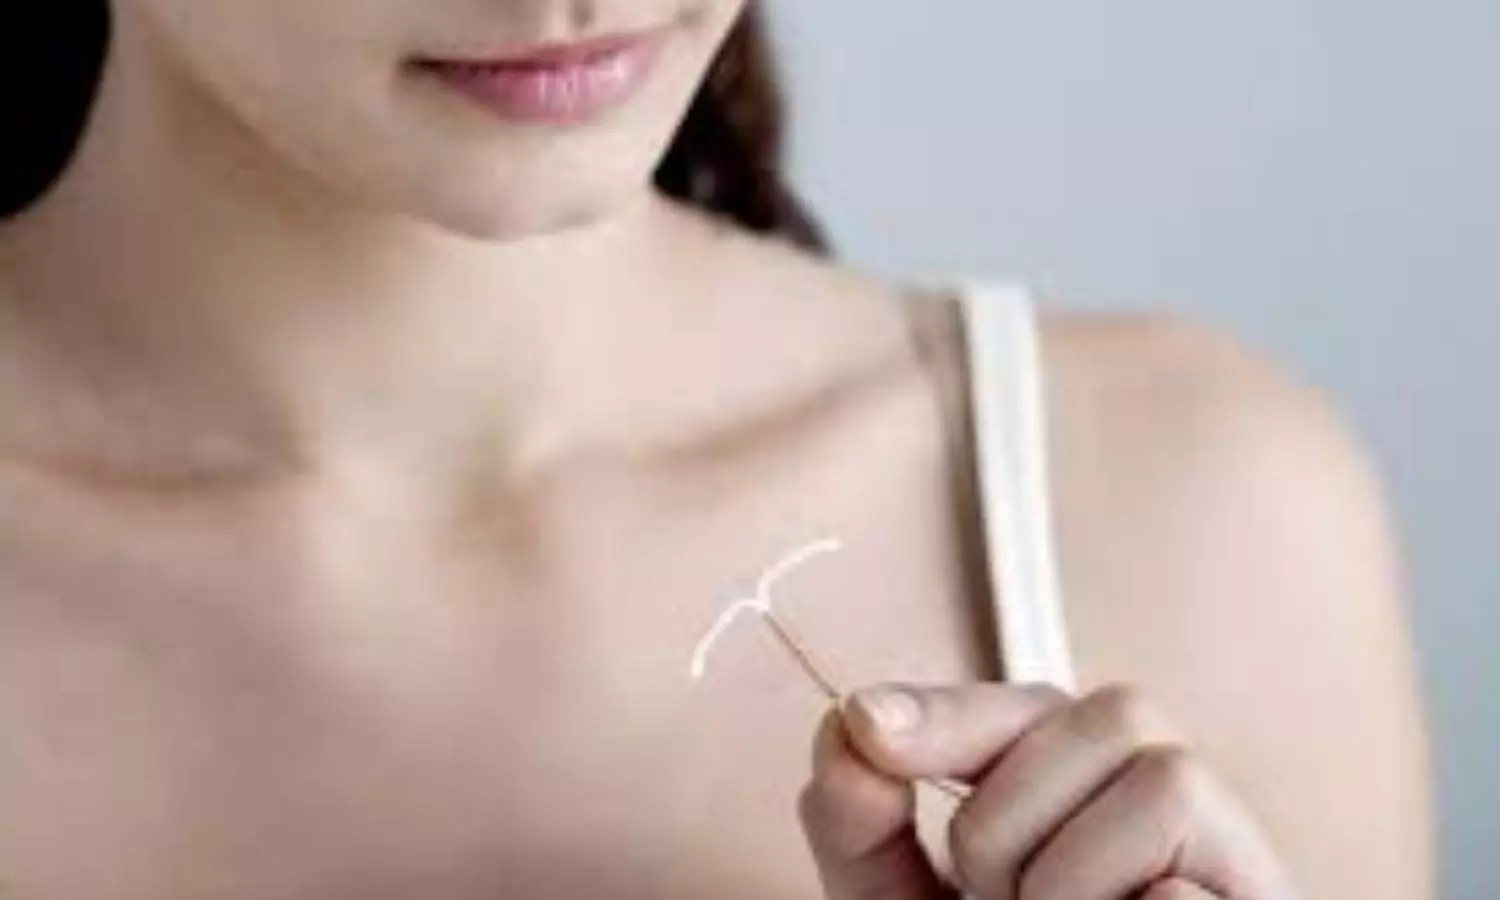 Tubal ligation no better than IUD at preventing pregnancy